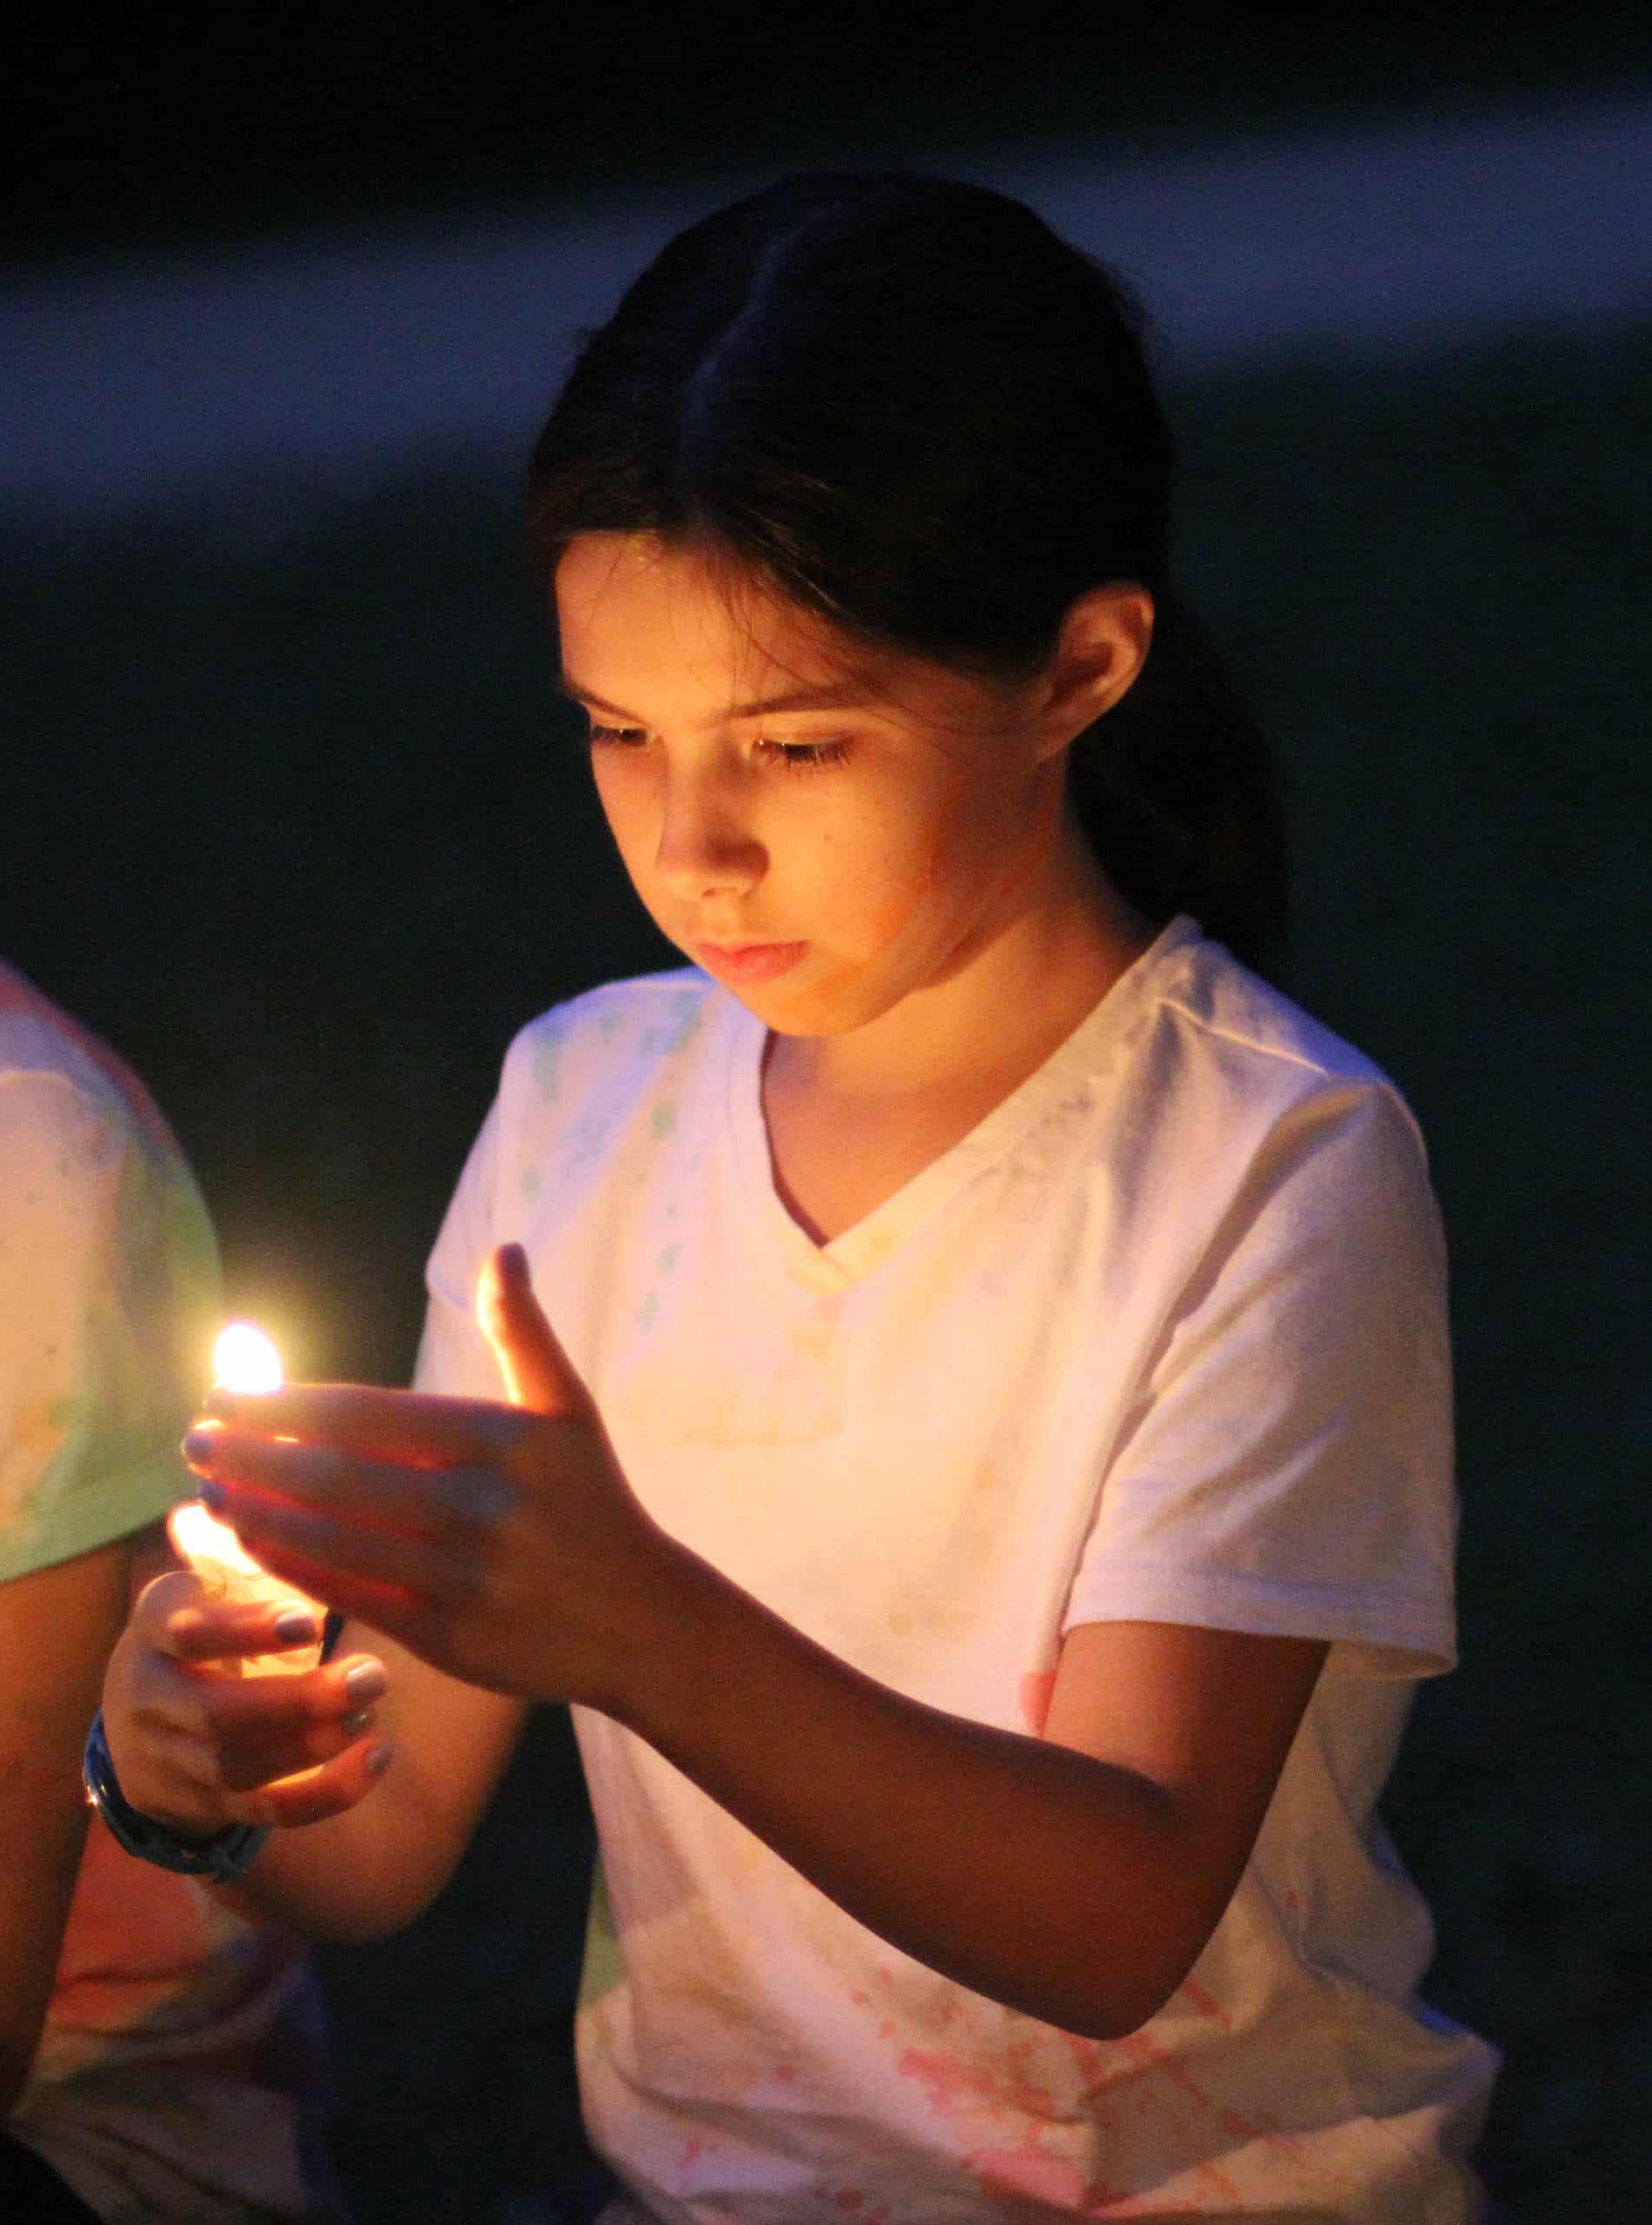 A kid at summer camp in Iowa holding a lit candle.